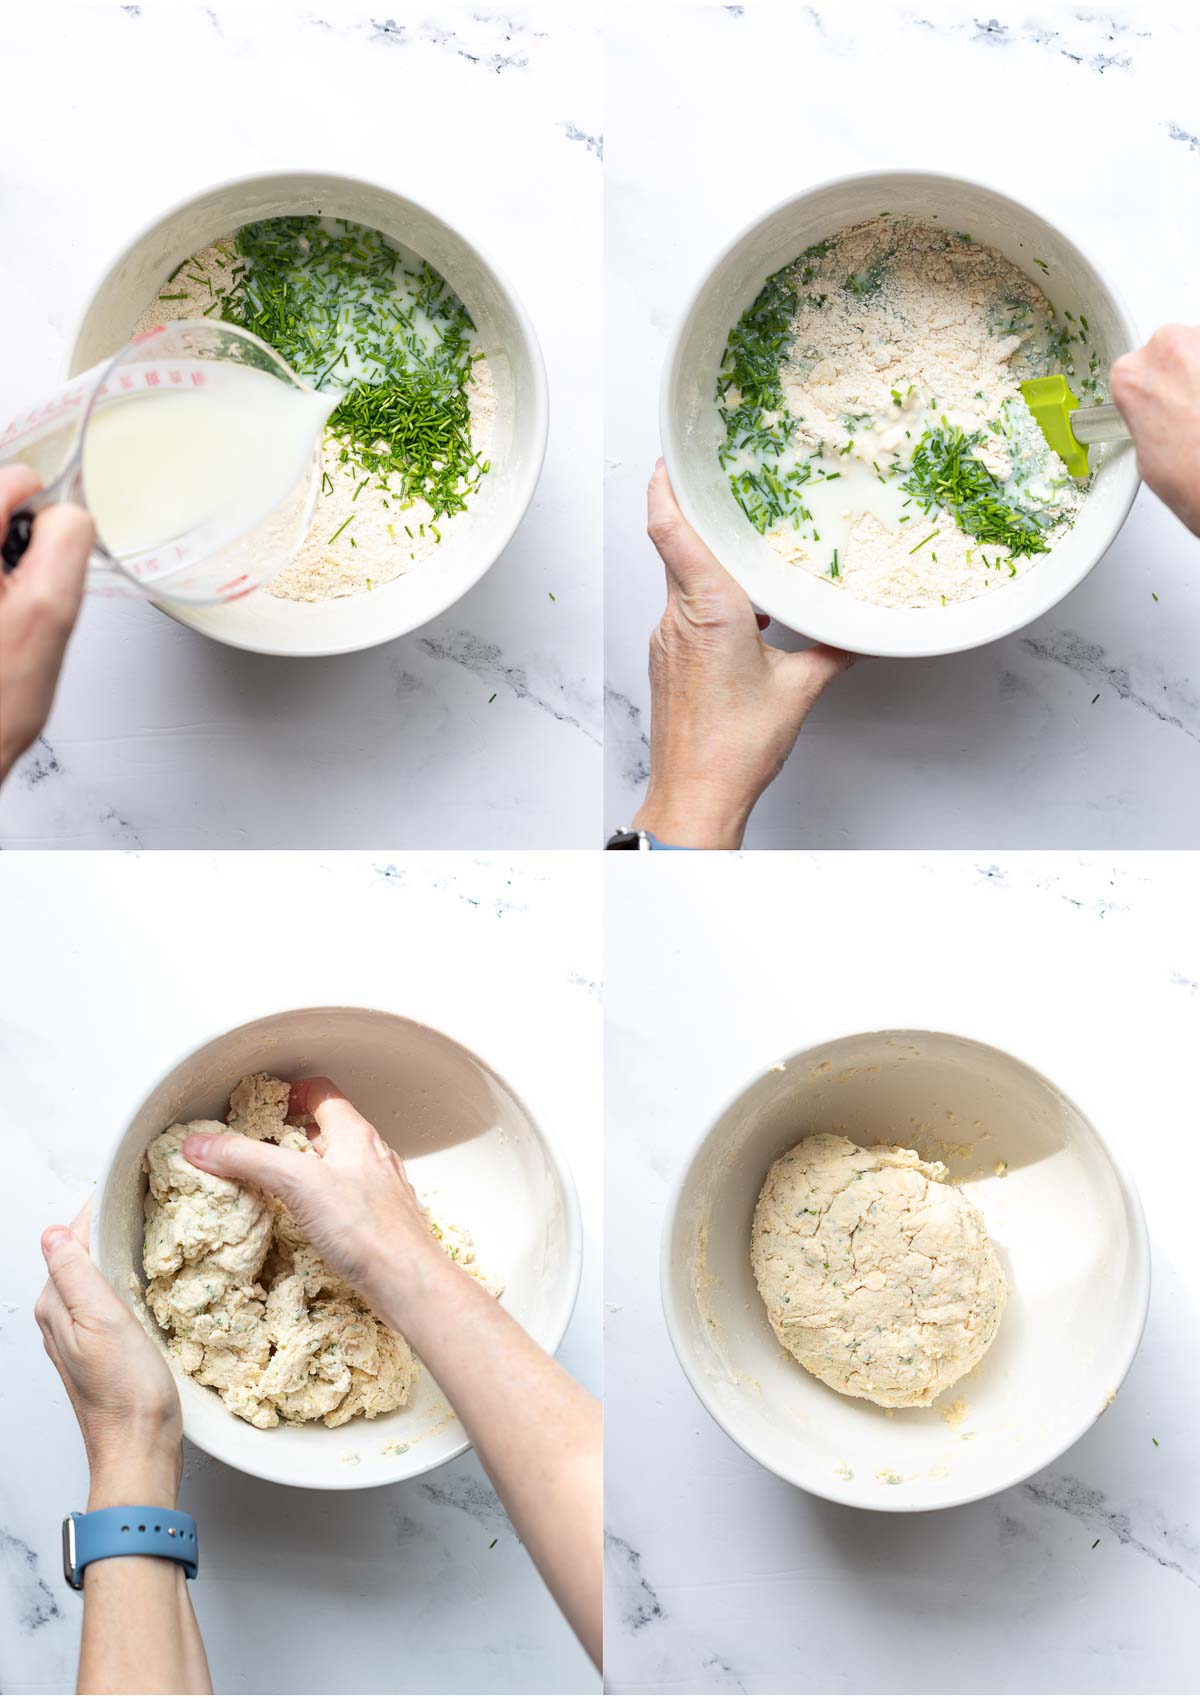 Preparation steps for making homemade biscuits